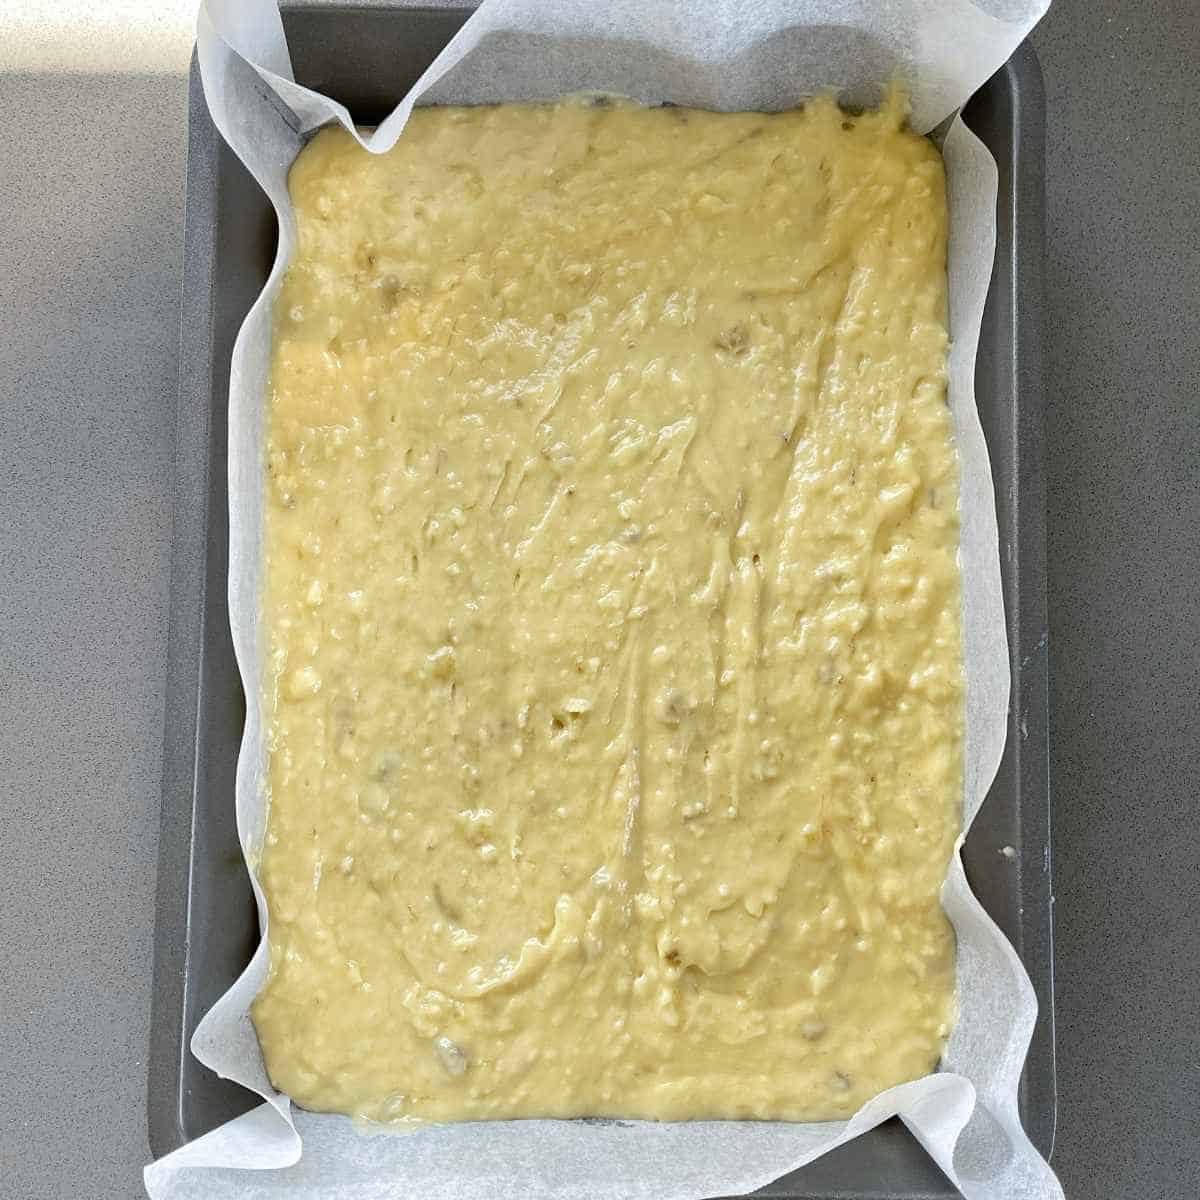 Uncooked banana cake in baking tin sitting on a grey bench